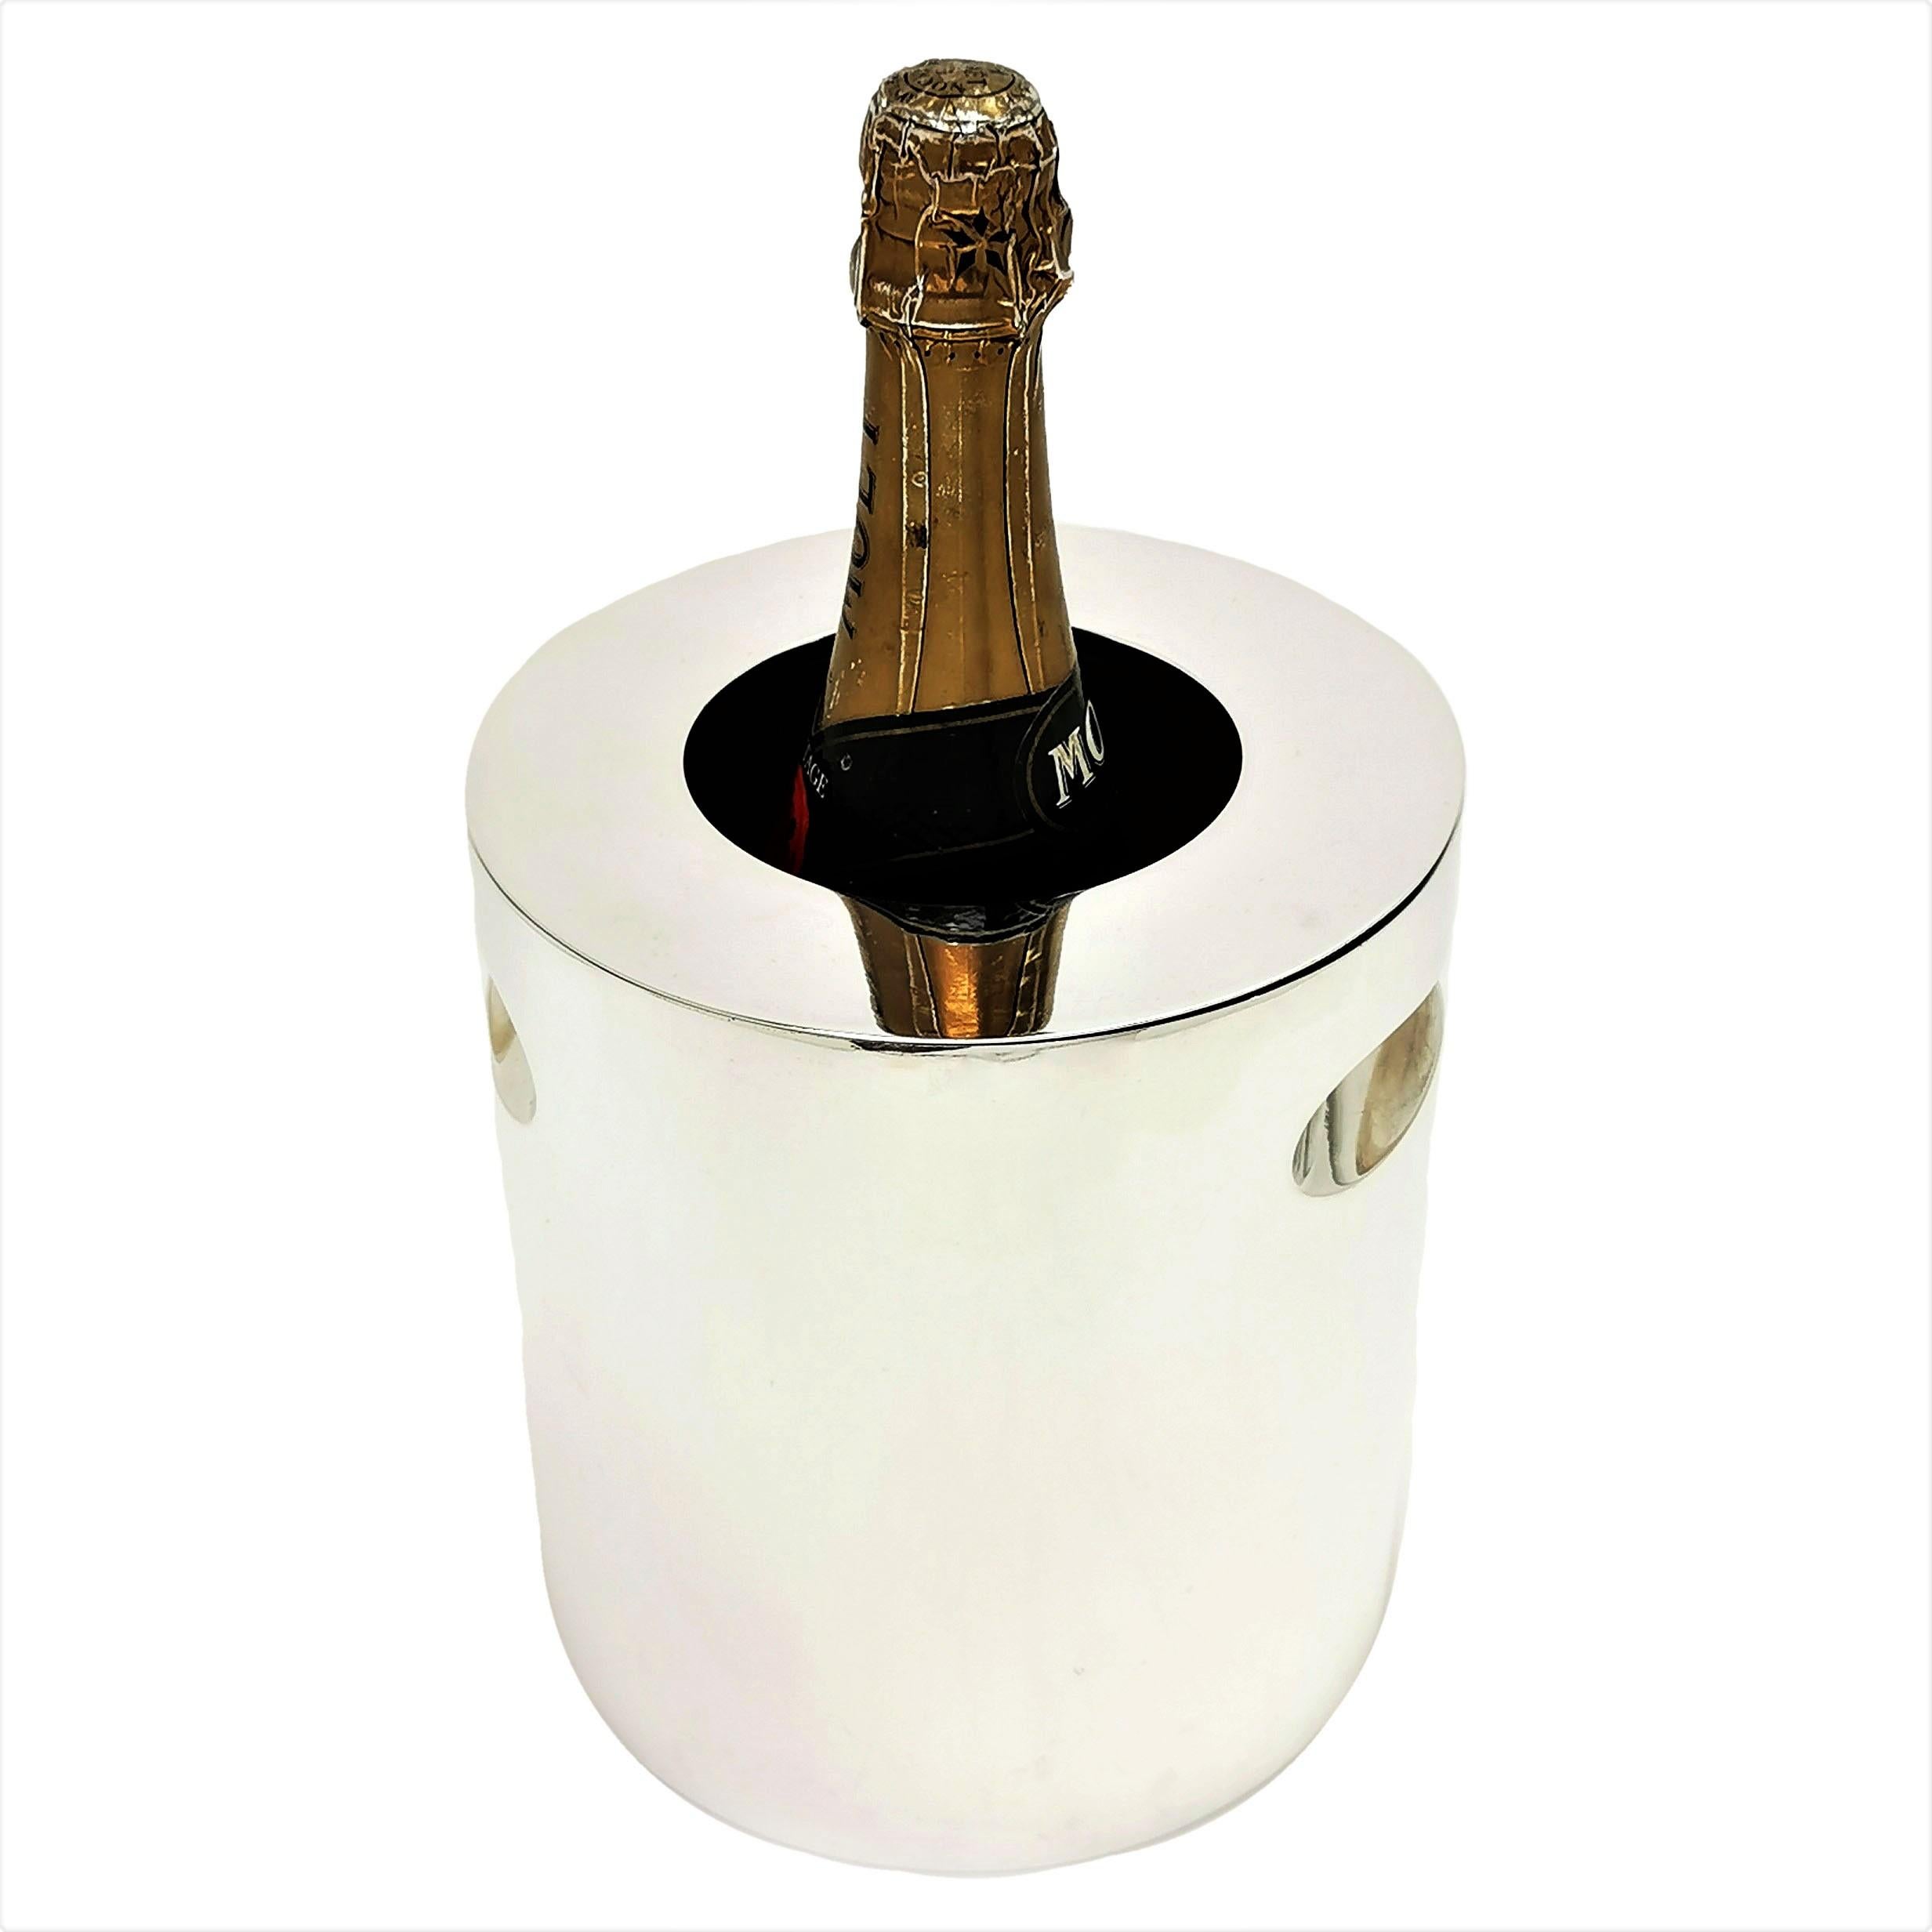 19th Century Modernist Italian Solid Silver Wine Cooler / Champagne Ice Bucket c. 1950